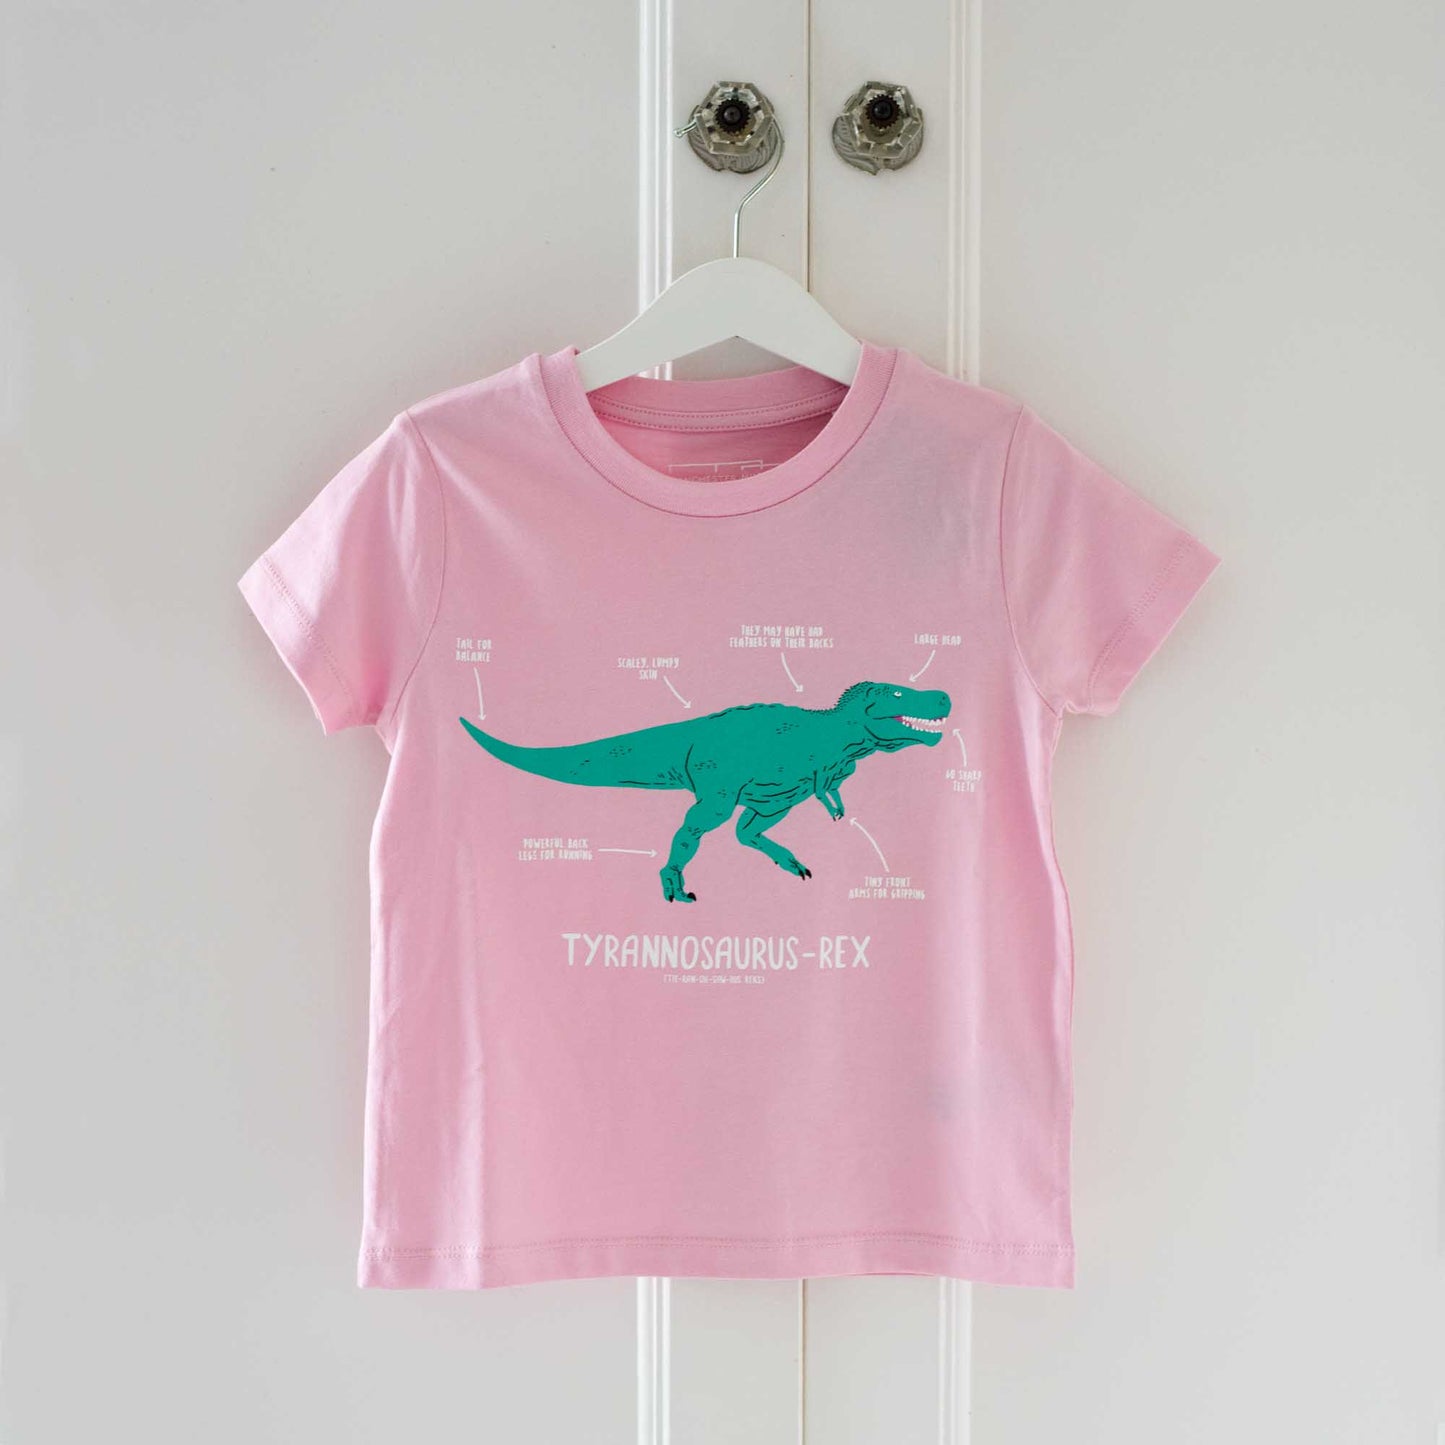 Load image into Gallery viewer, Pale pink shirt with a turquoise illustrated t-rex printed on the chest. Underneath the dinosaur the name and pronunciation are written in white.
